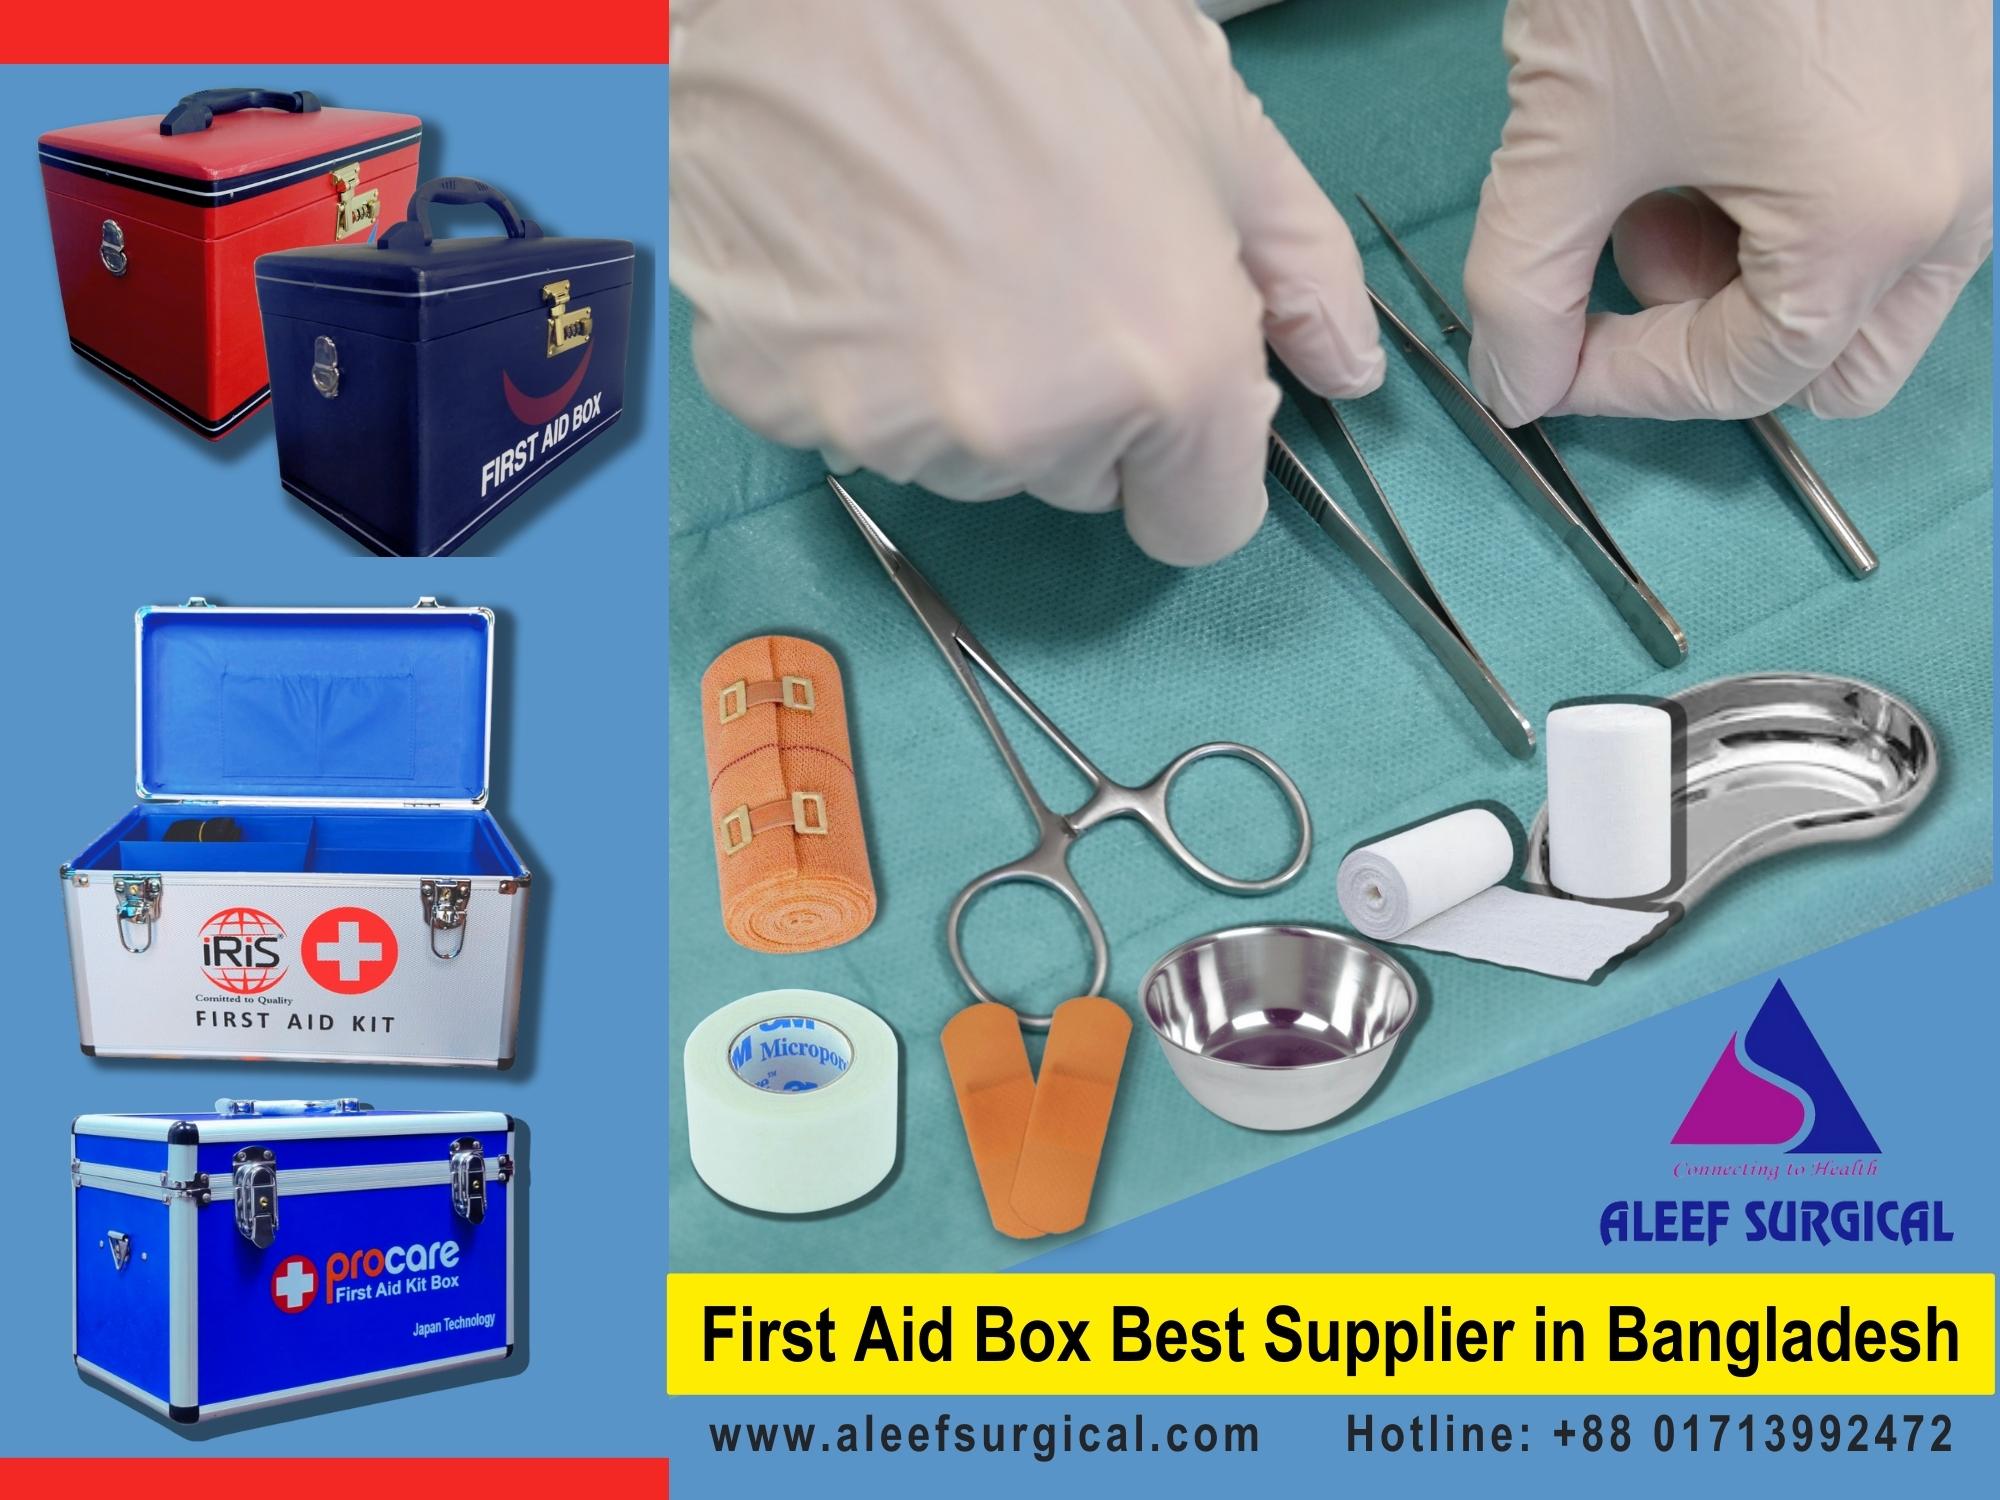 First Aid Kit-The Best Price in Bangladesh. Image of First Aid Kit